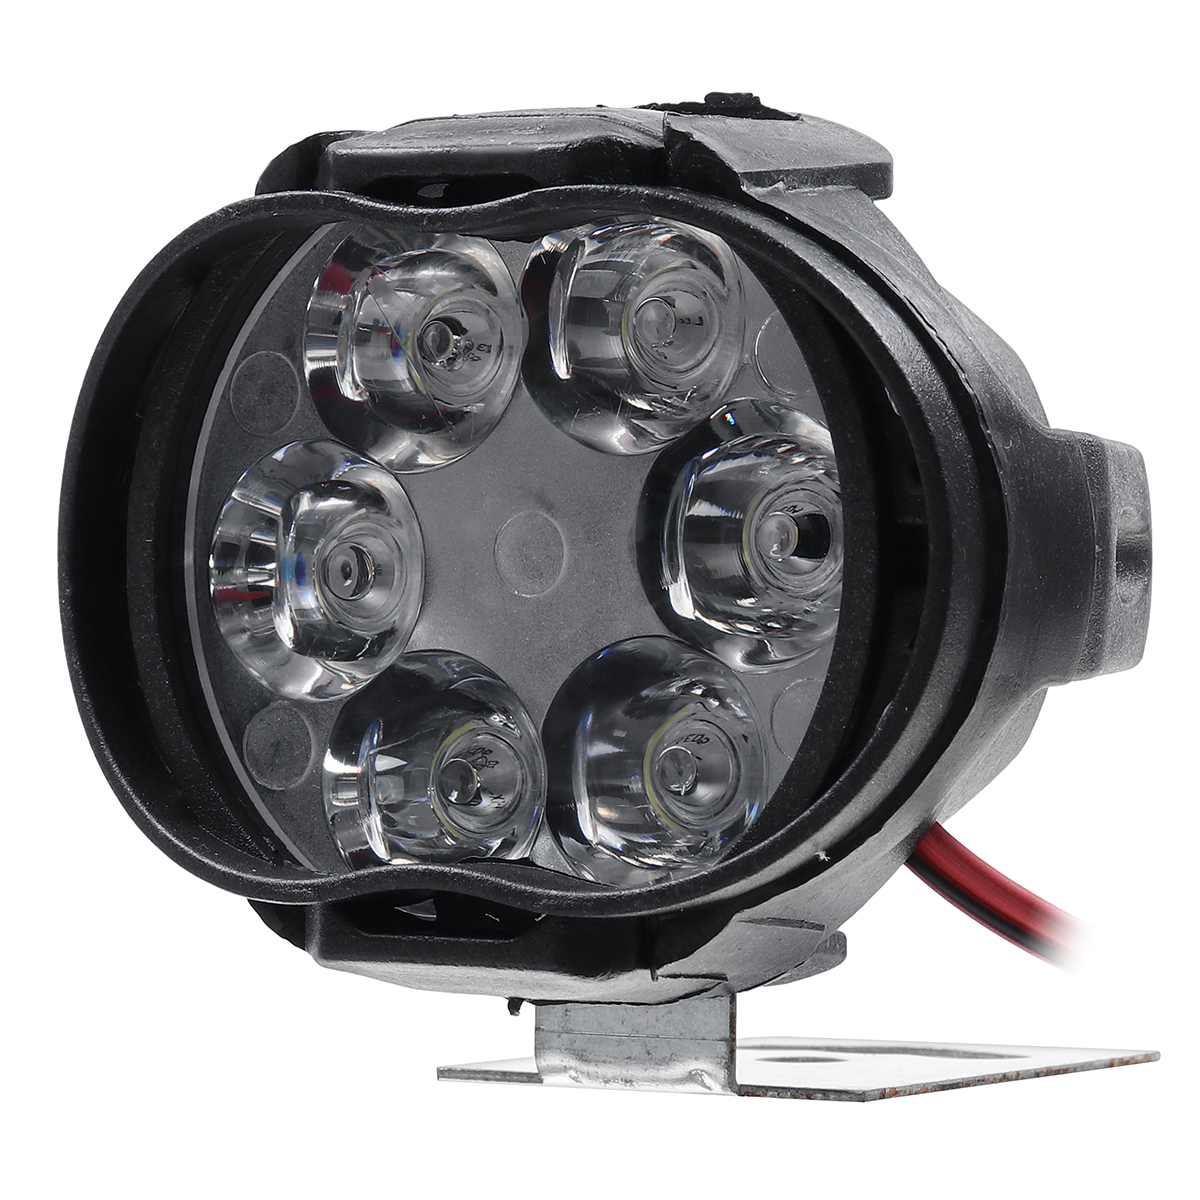 Pair 12-80V 10W 6 LED 1500LM Headlight Retrofit Spotlight External Waterproof for Motorcycle Scooter